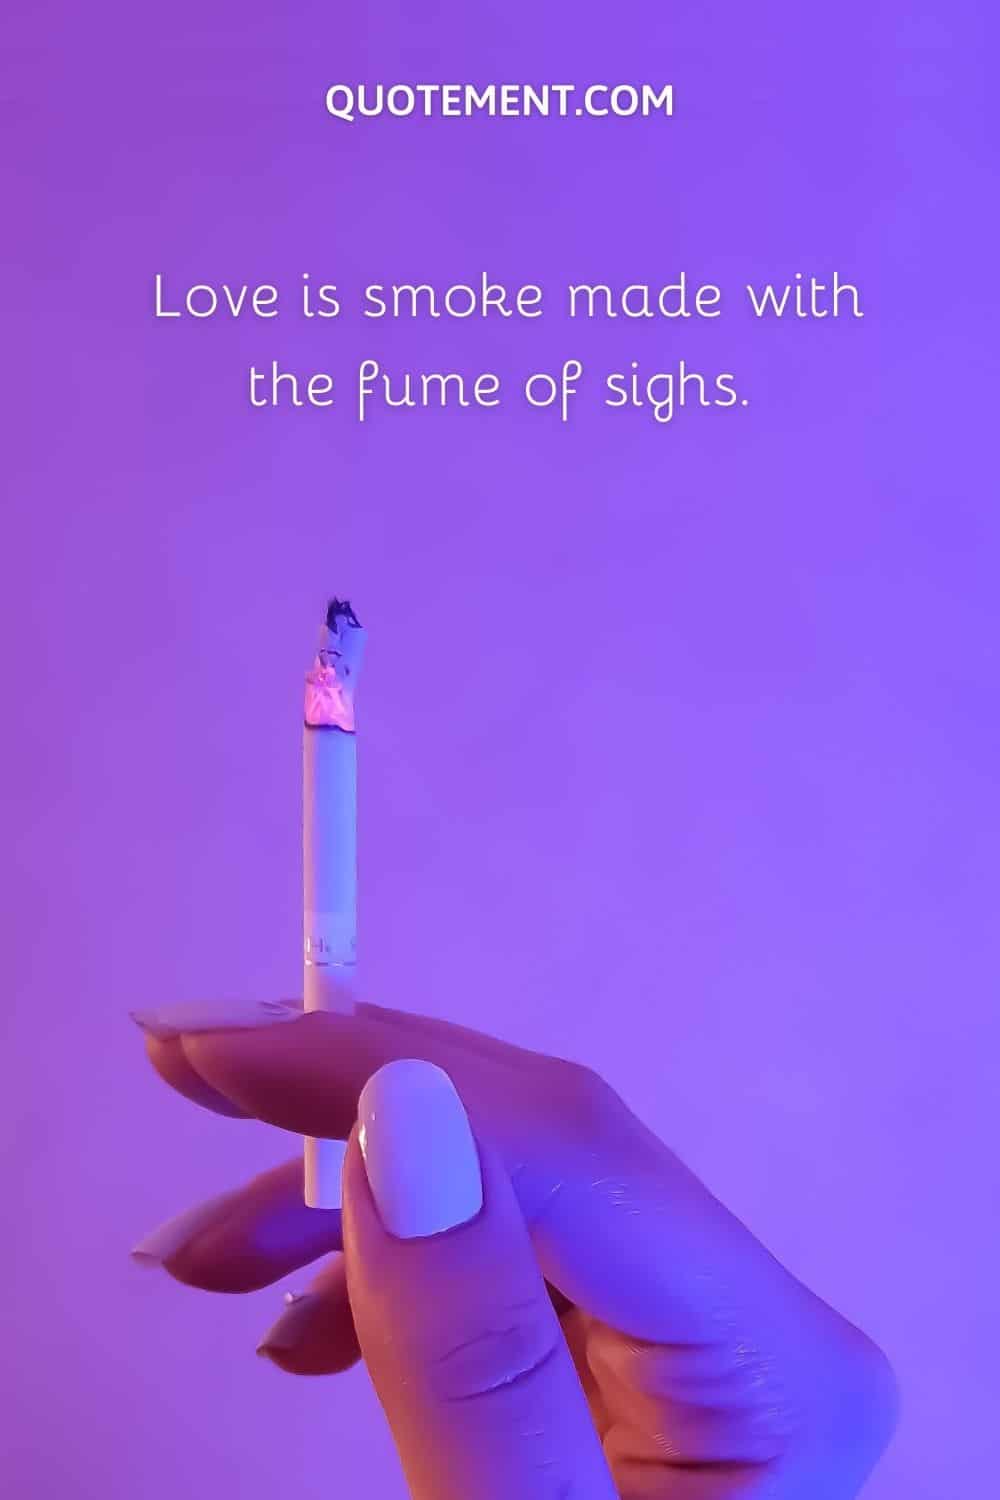 Love is smoke made with the fume of sighs